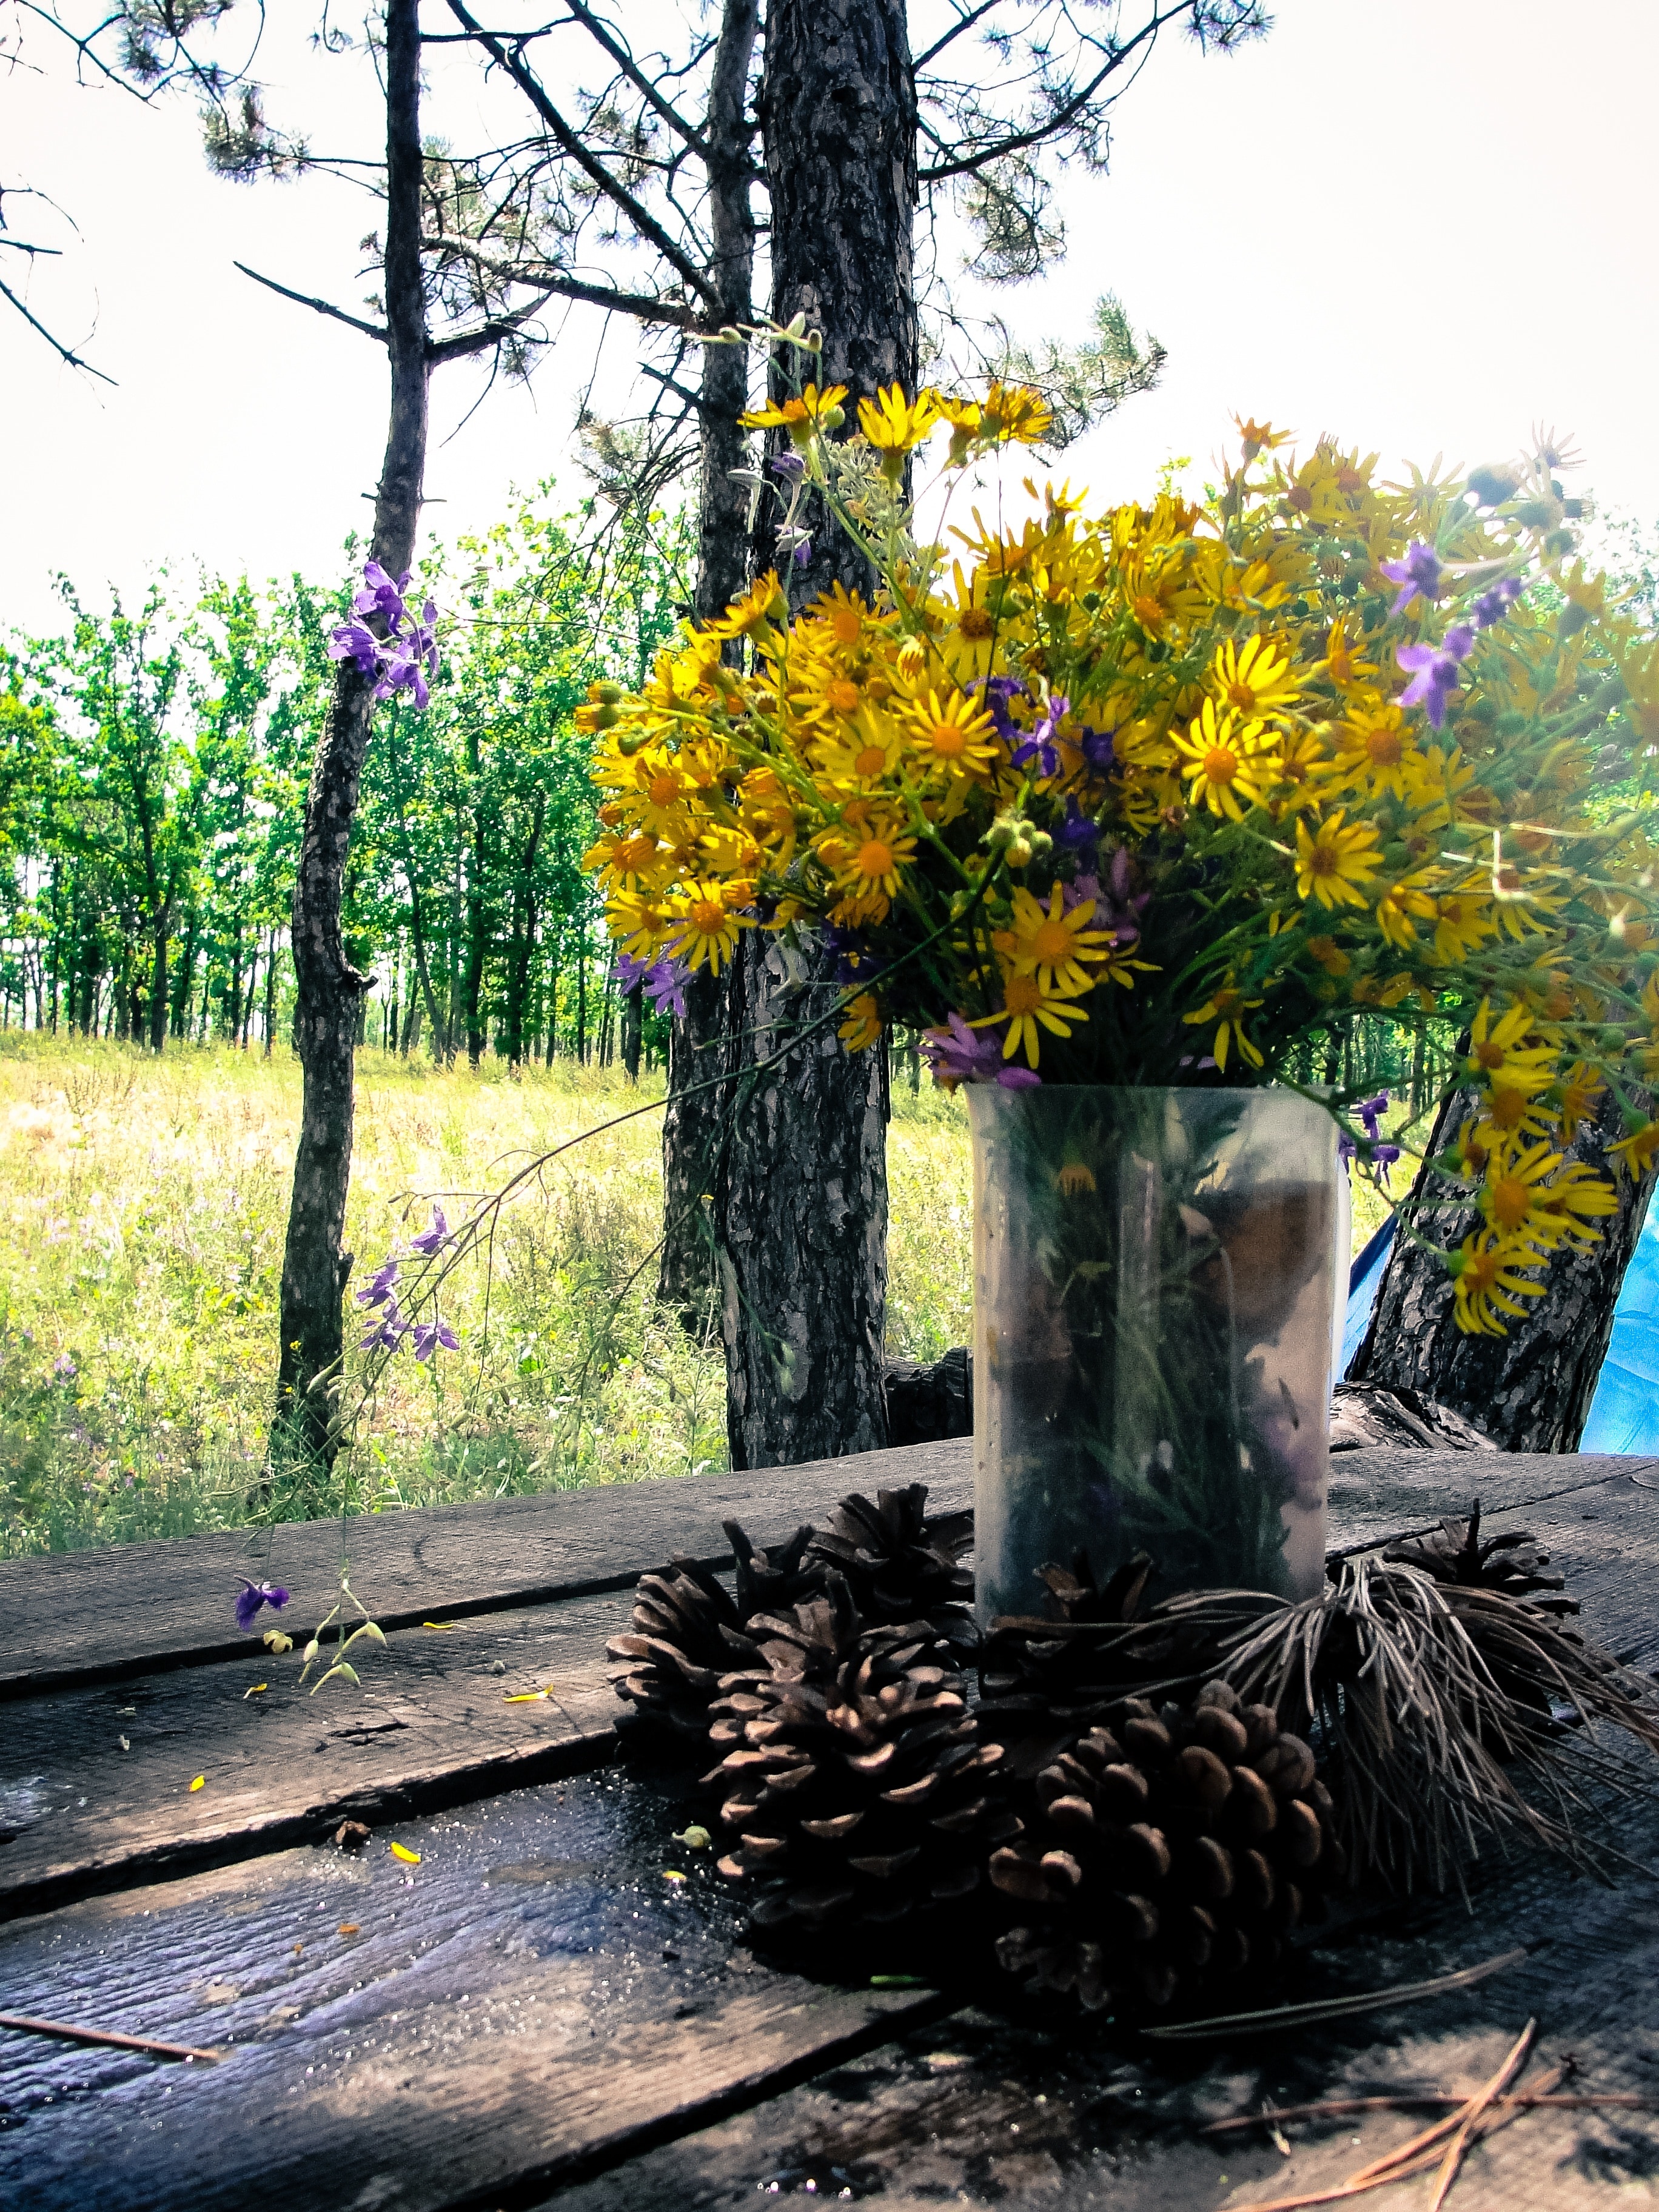 pinecones and yellow petaled flowers on the table